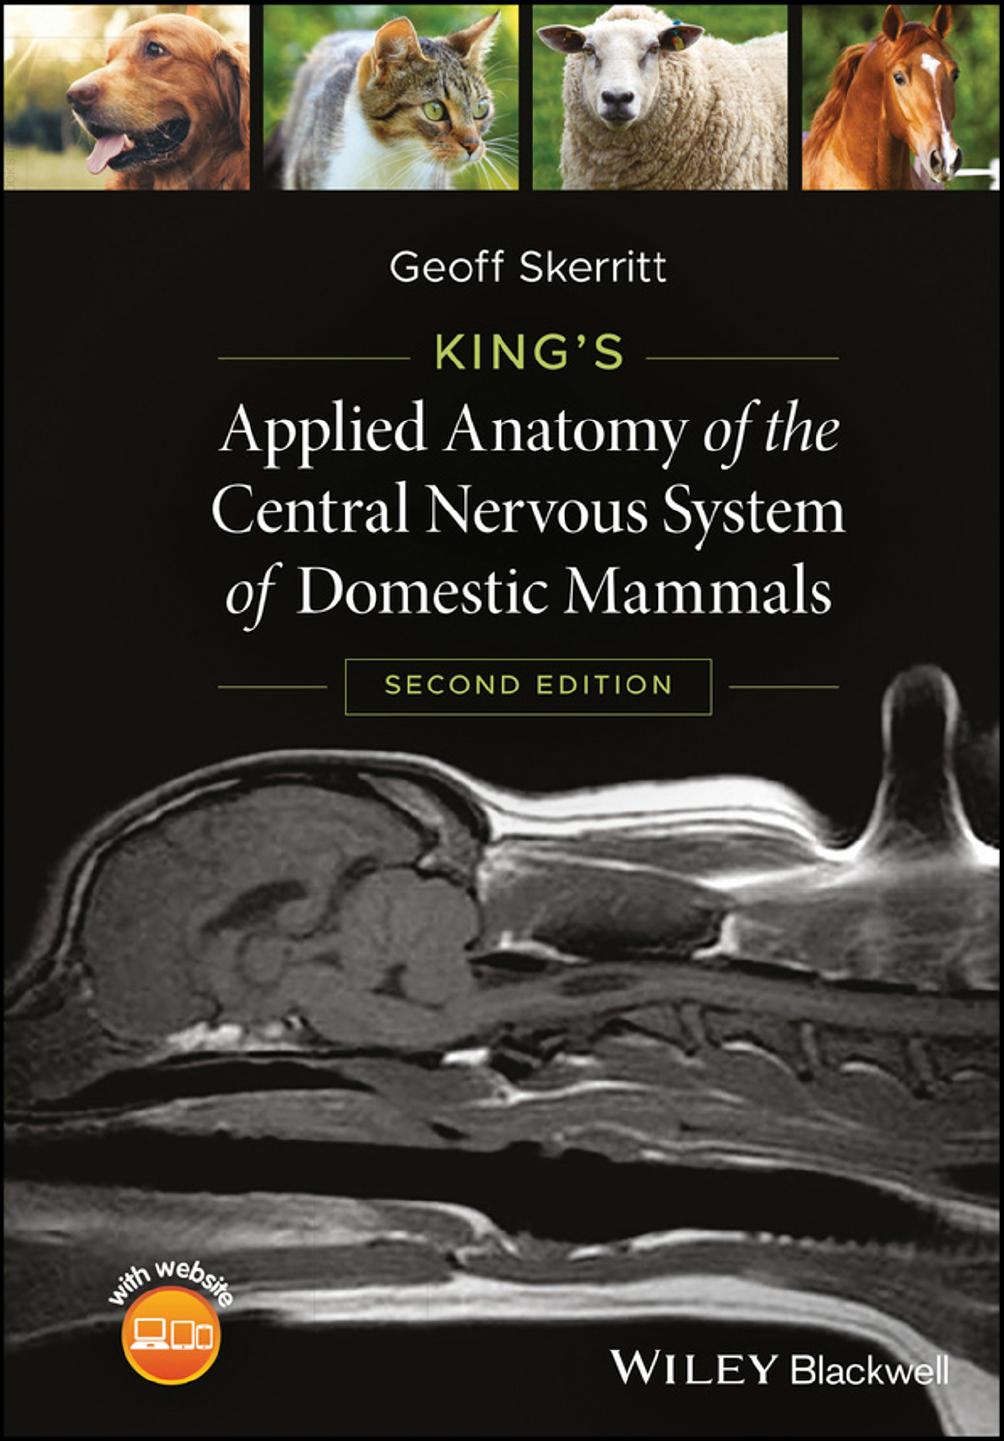 King’s Applied Anatomy of the Central Nervous System of Domestic Mammals, 2nd Edition